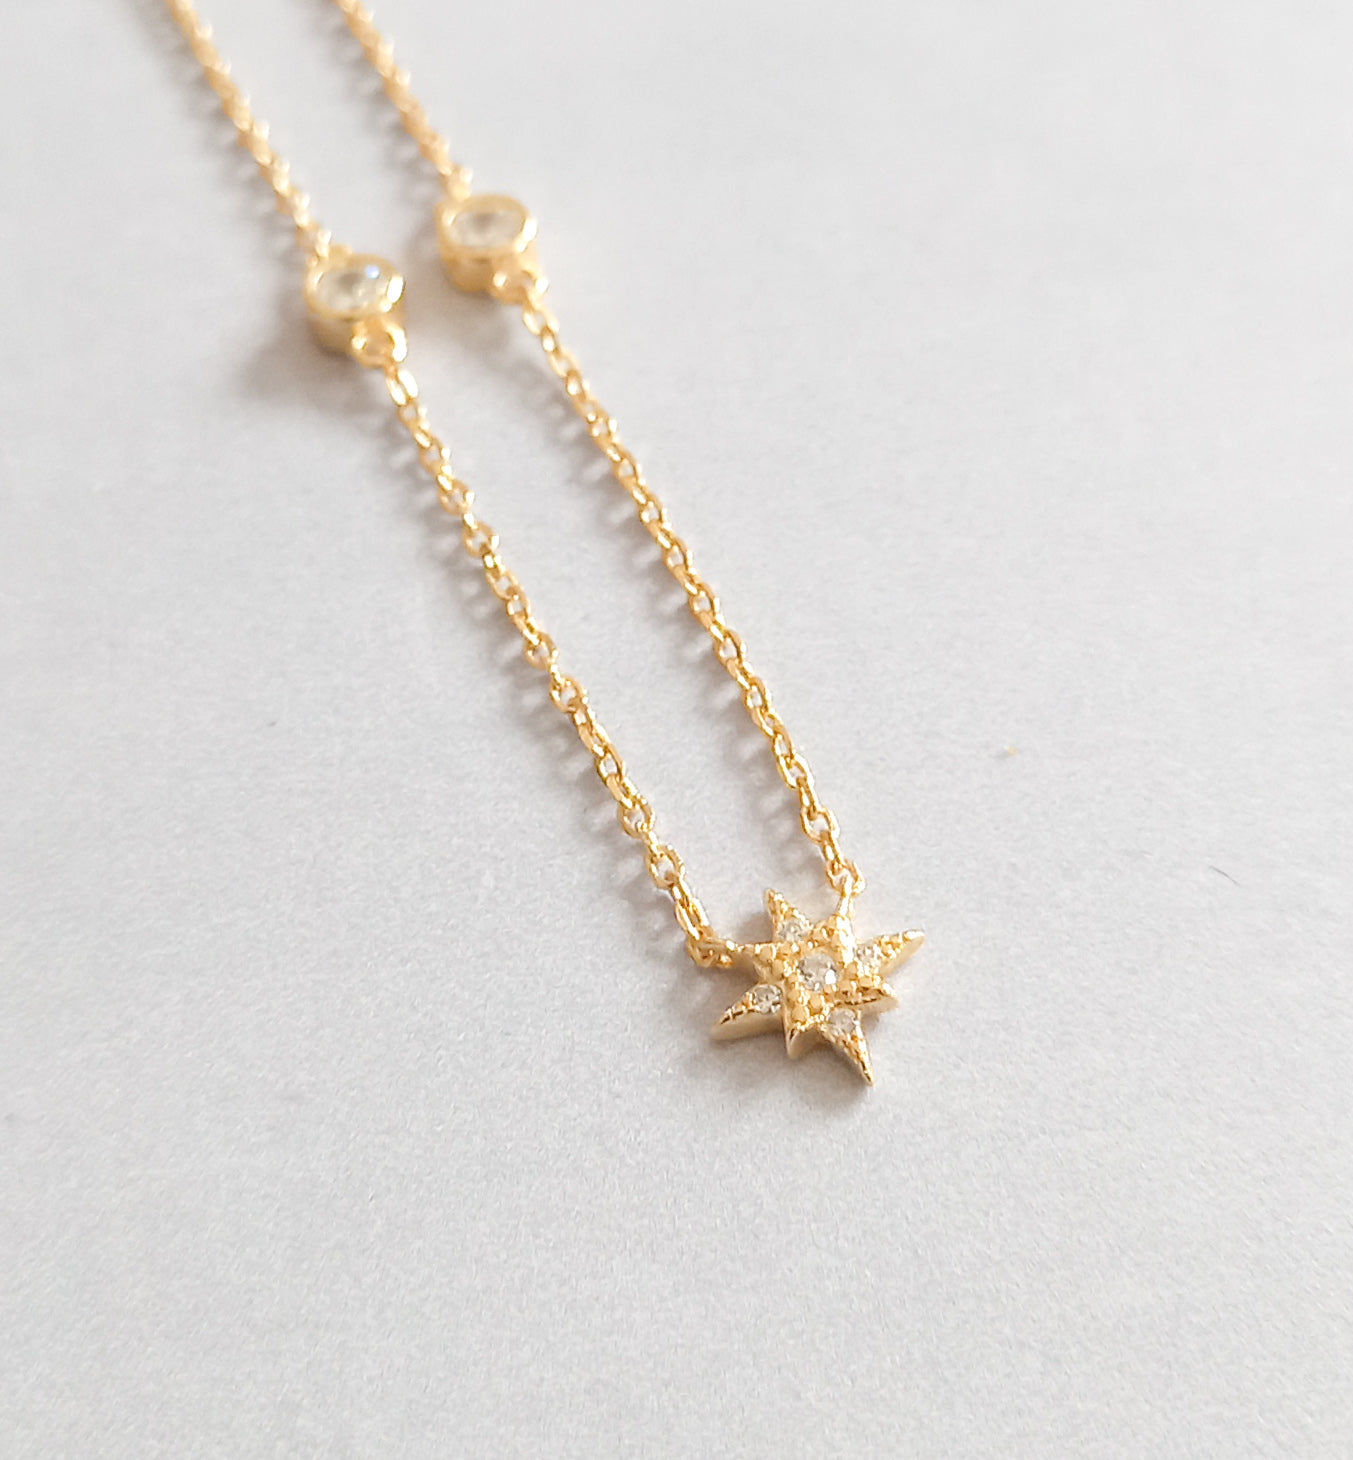 star necklace gold  necklace with stars   necklace with stars gold    stacked necklaces layered chain double layer necklace three layer necklace  sterling silver layered necklace 3 layer chain stackable necklaces dainty star necklace dainty gold cross necklace layered choker necklace  14k gold layered necklace set  stacked necklaces gold  stacked necklaces  dainty jewellery gold  dainty gold jewellery  dainty jewellery  star jewellery ireland